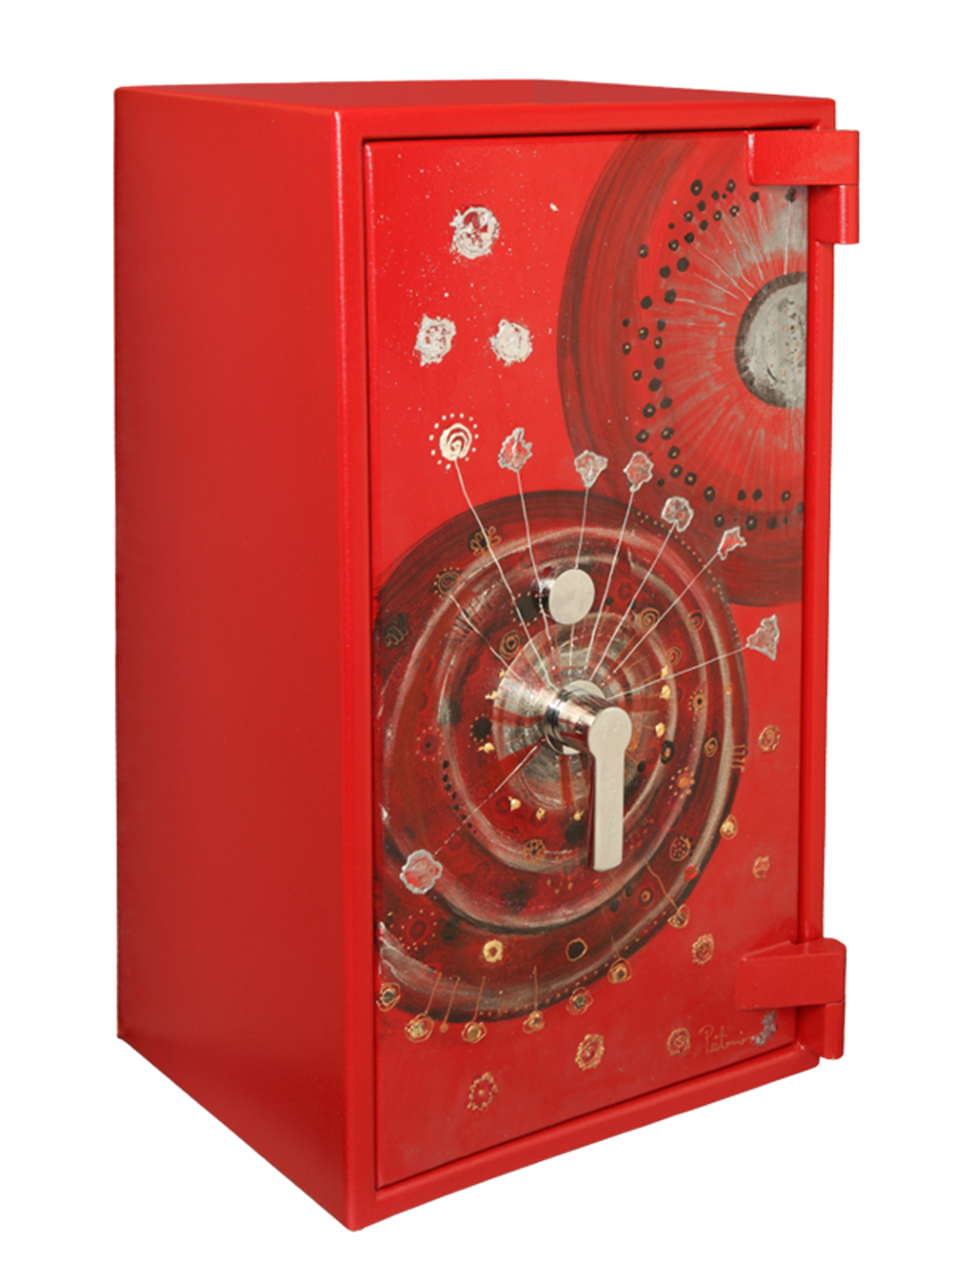 Unique paintings of safes: Ruby, red gem